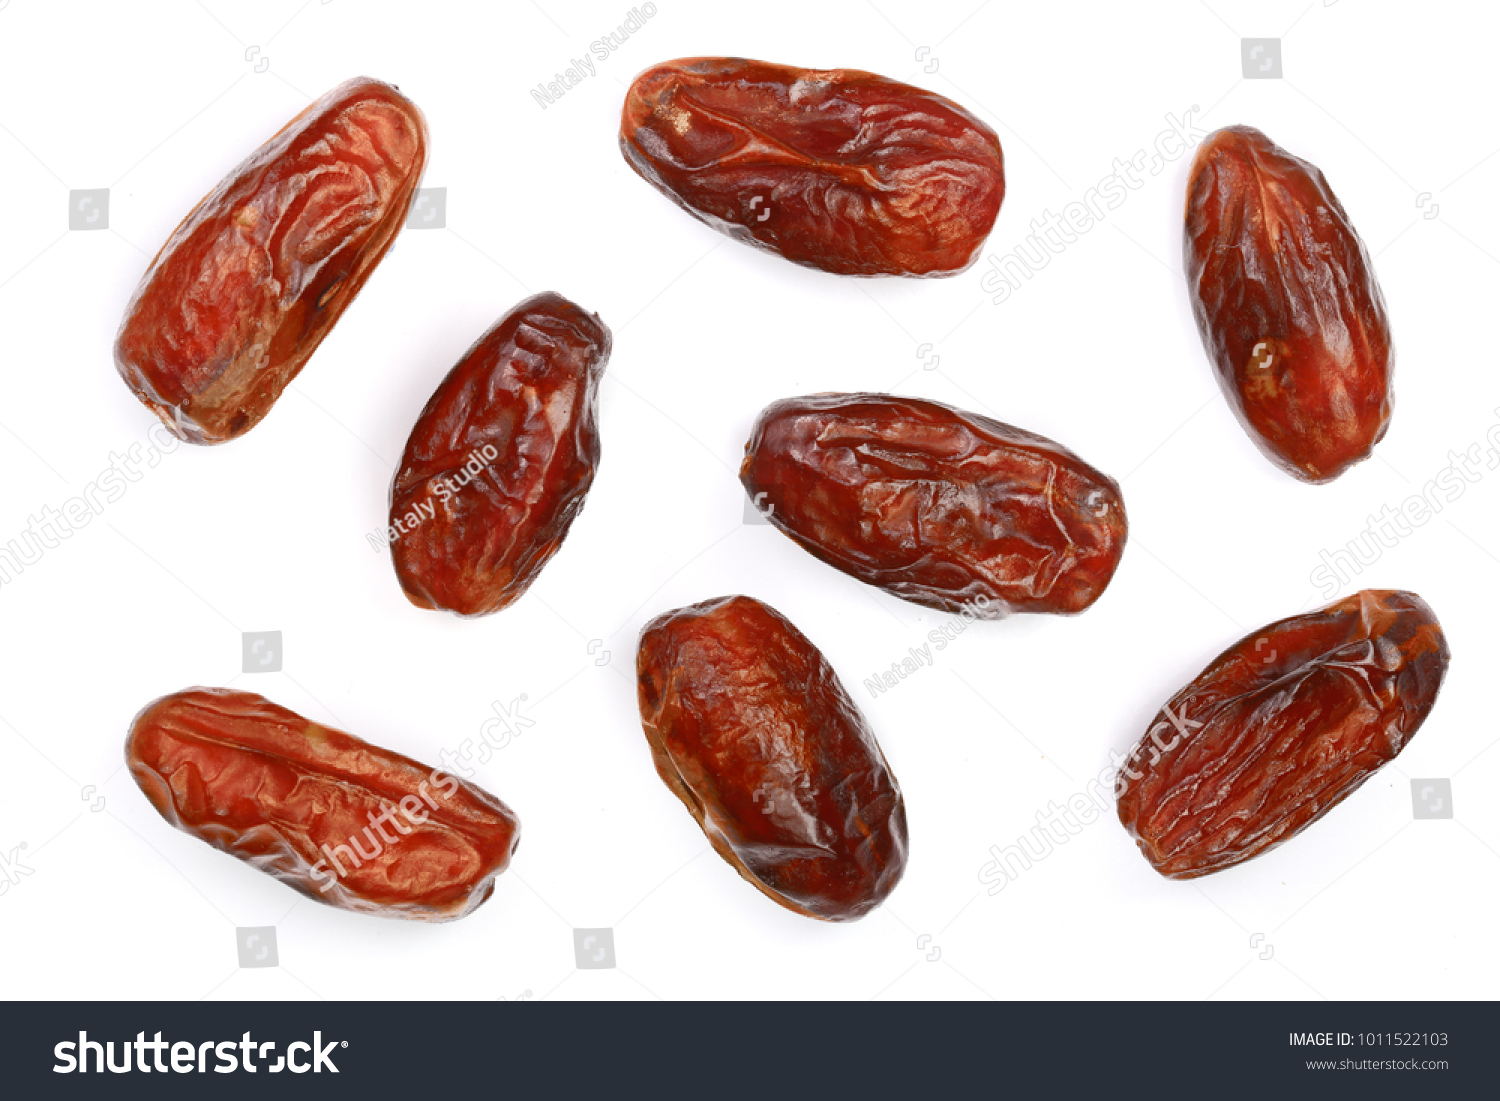 dry dates isolated on white background. Top view. Flat lay pattern #1011522103